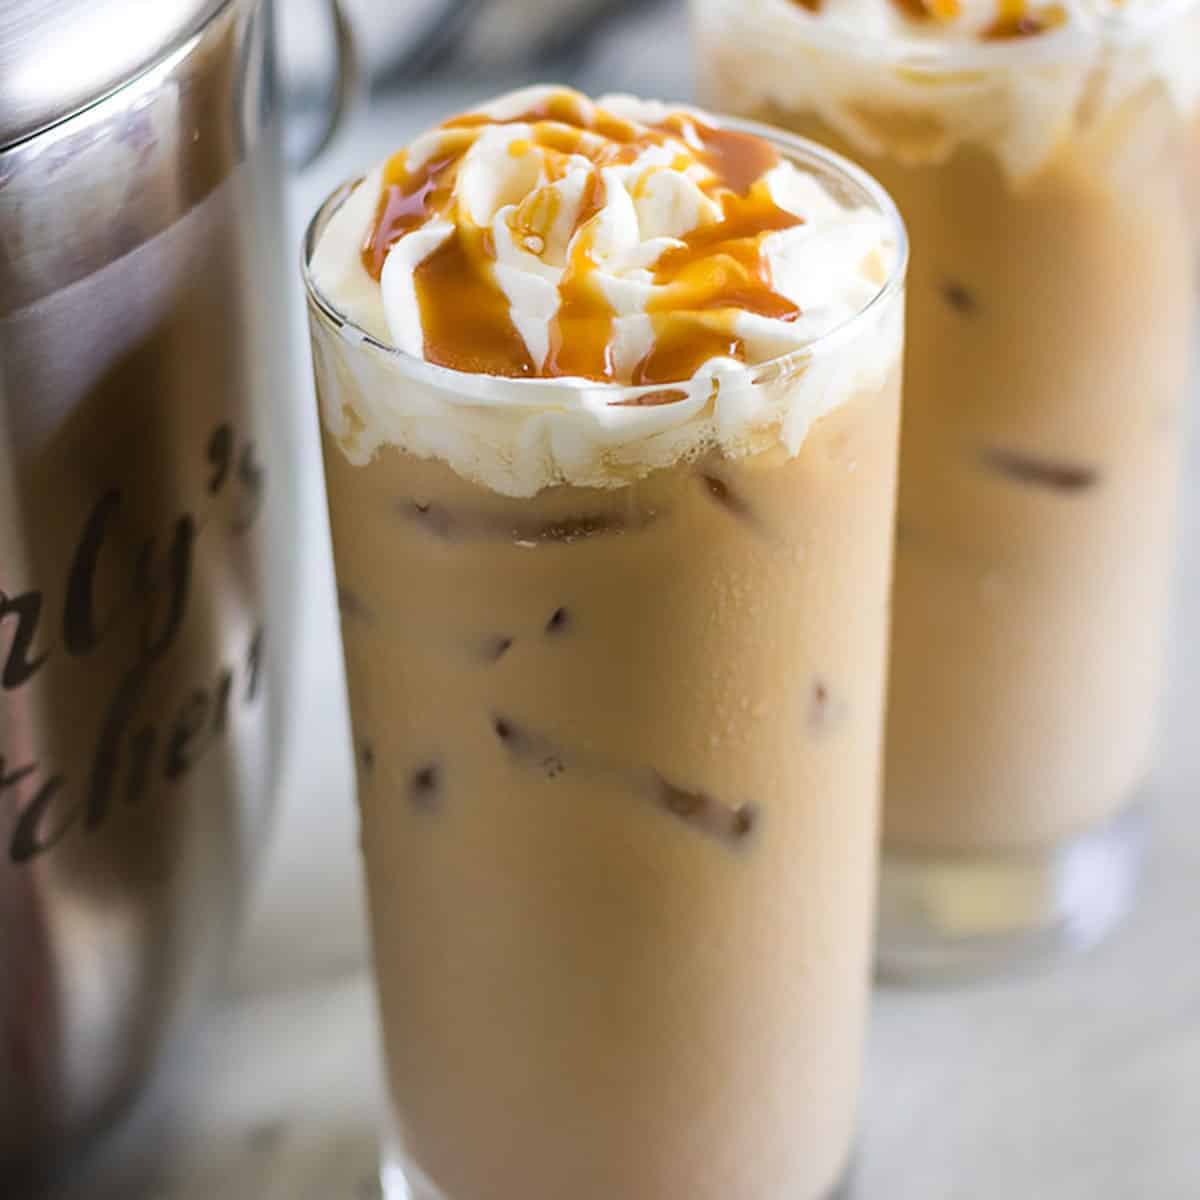 Two glasses of iced coffee with whipped cream and caramel sauce.